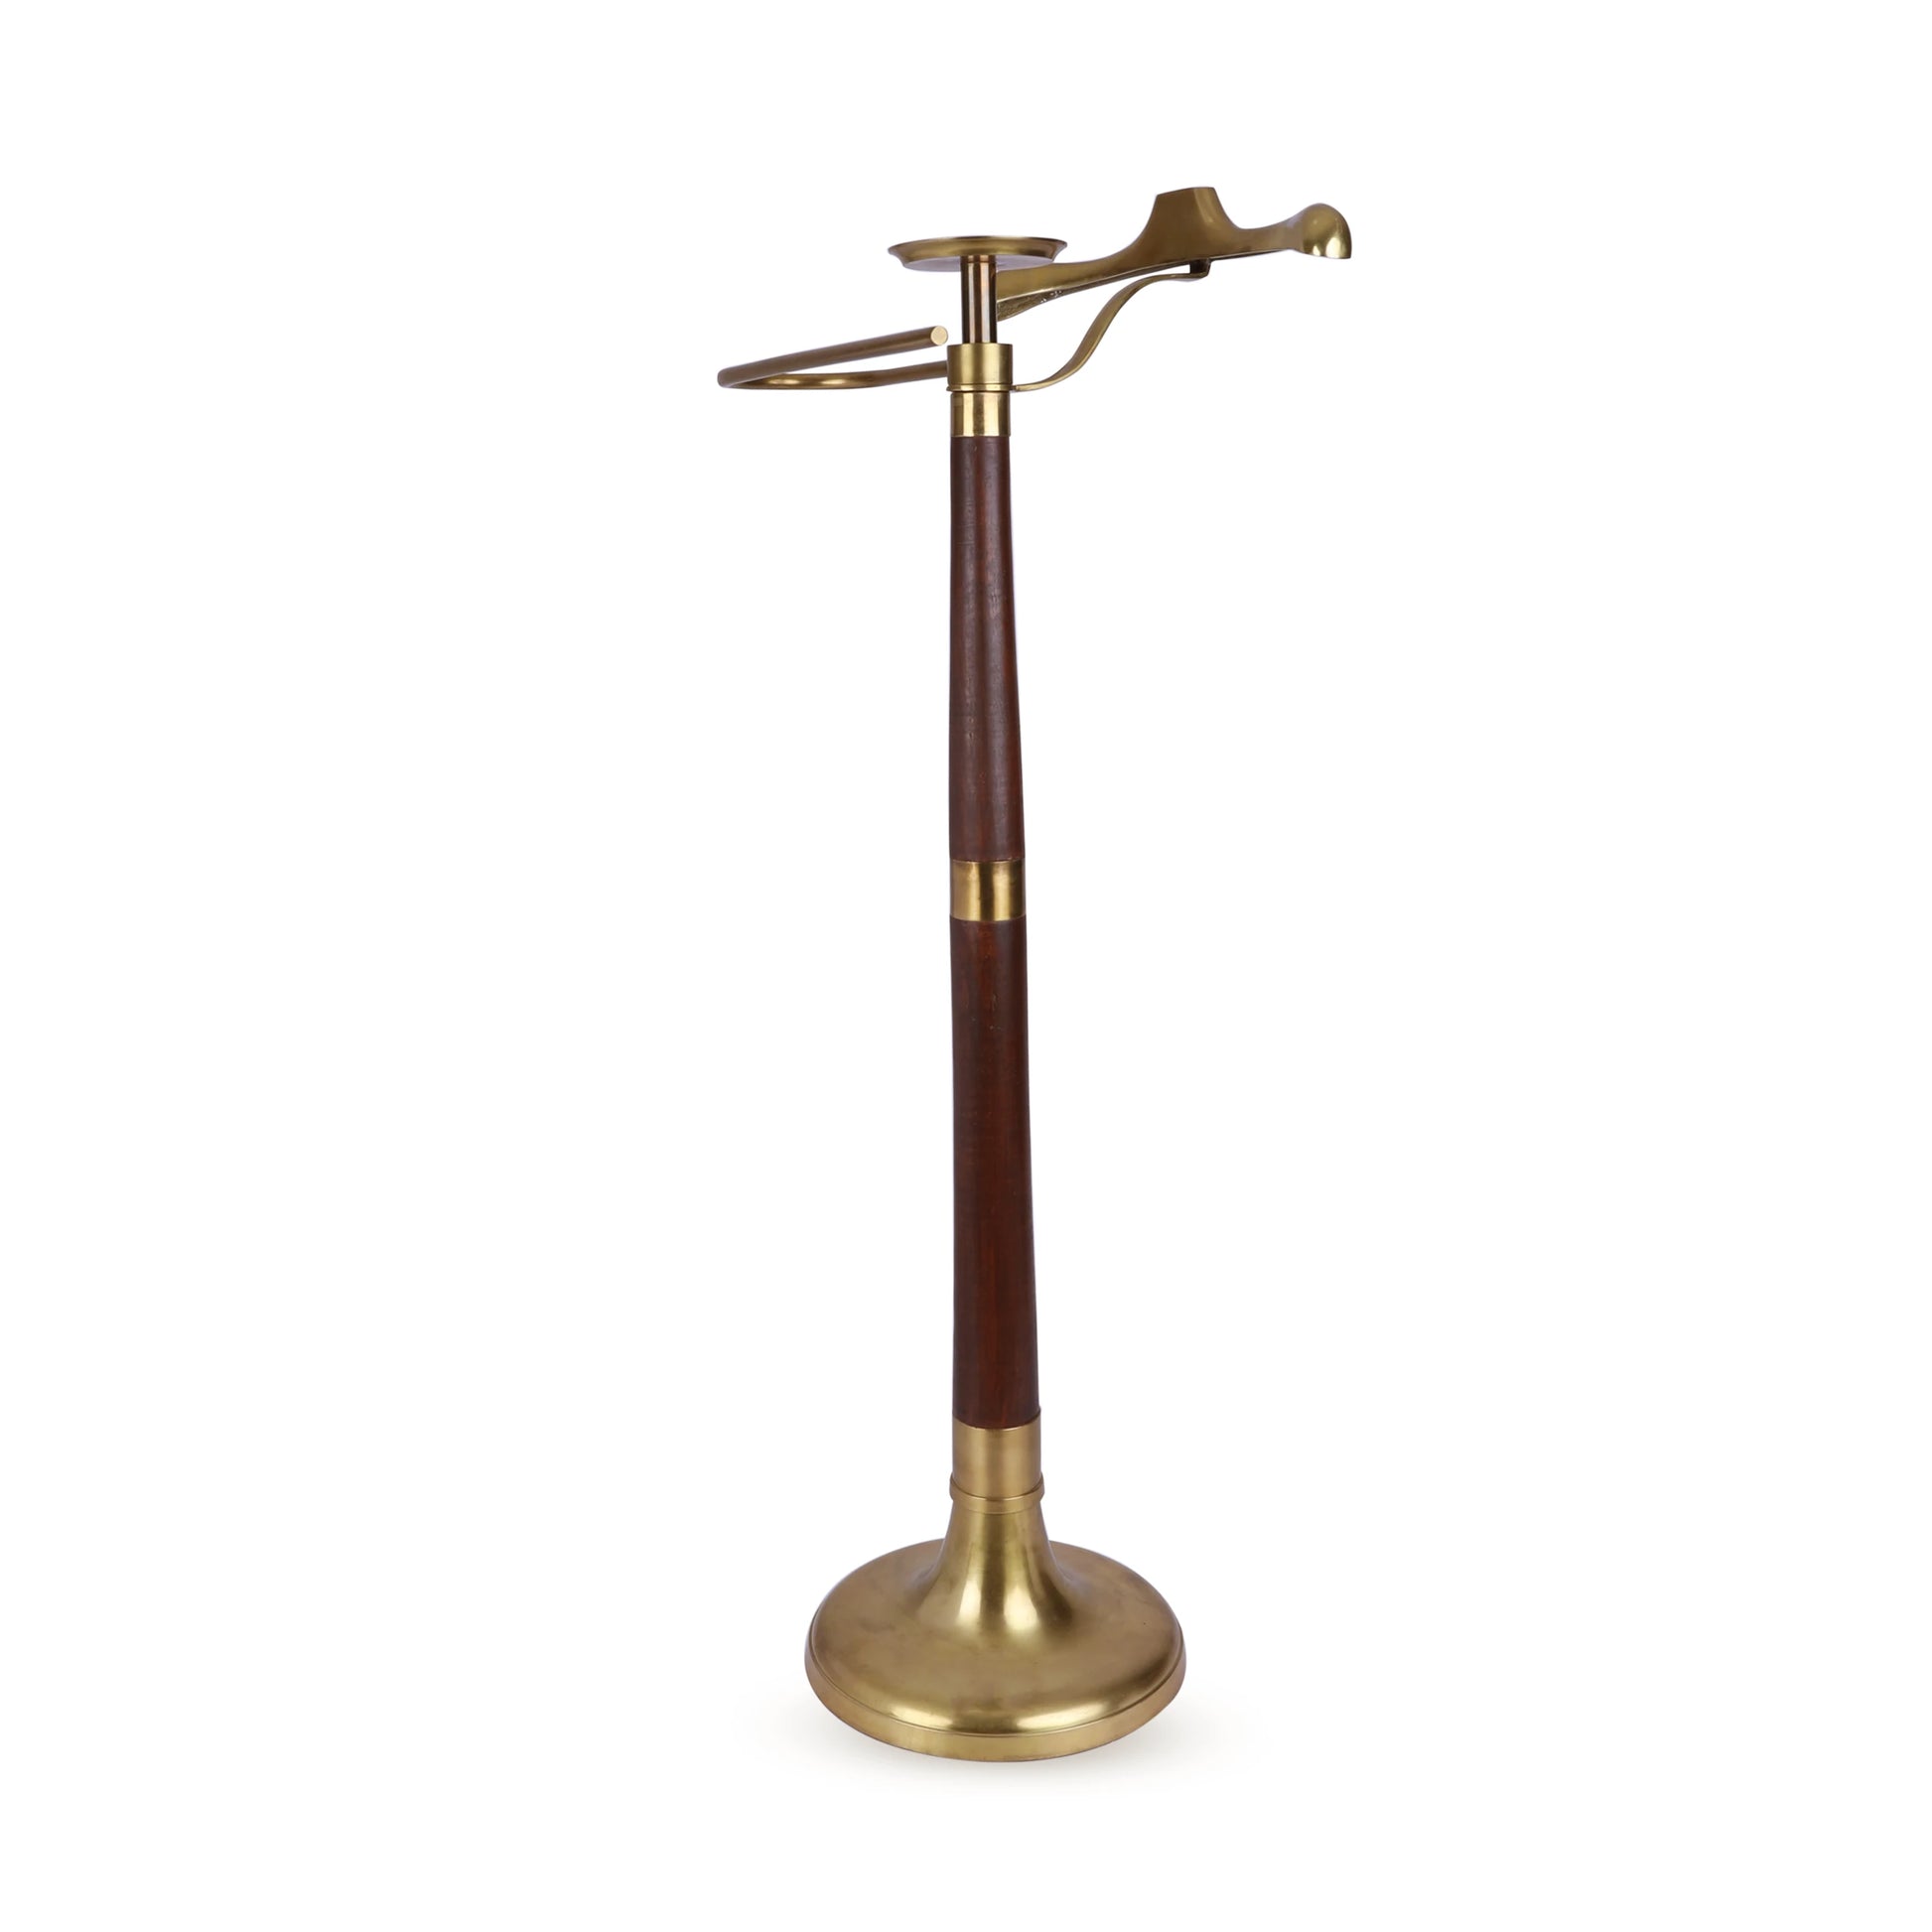 Angled View of Adjustable Coat suit Stand